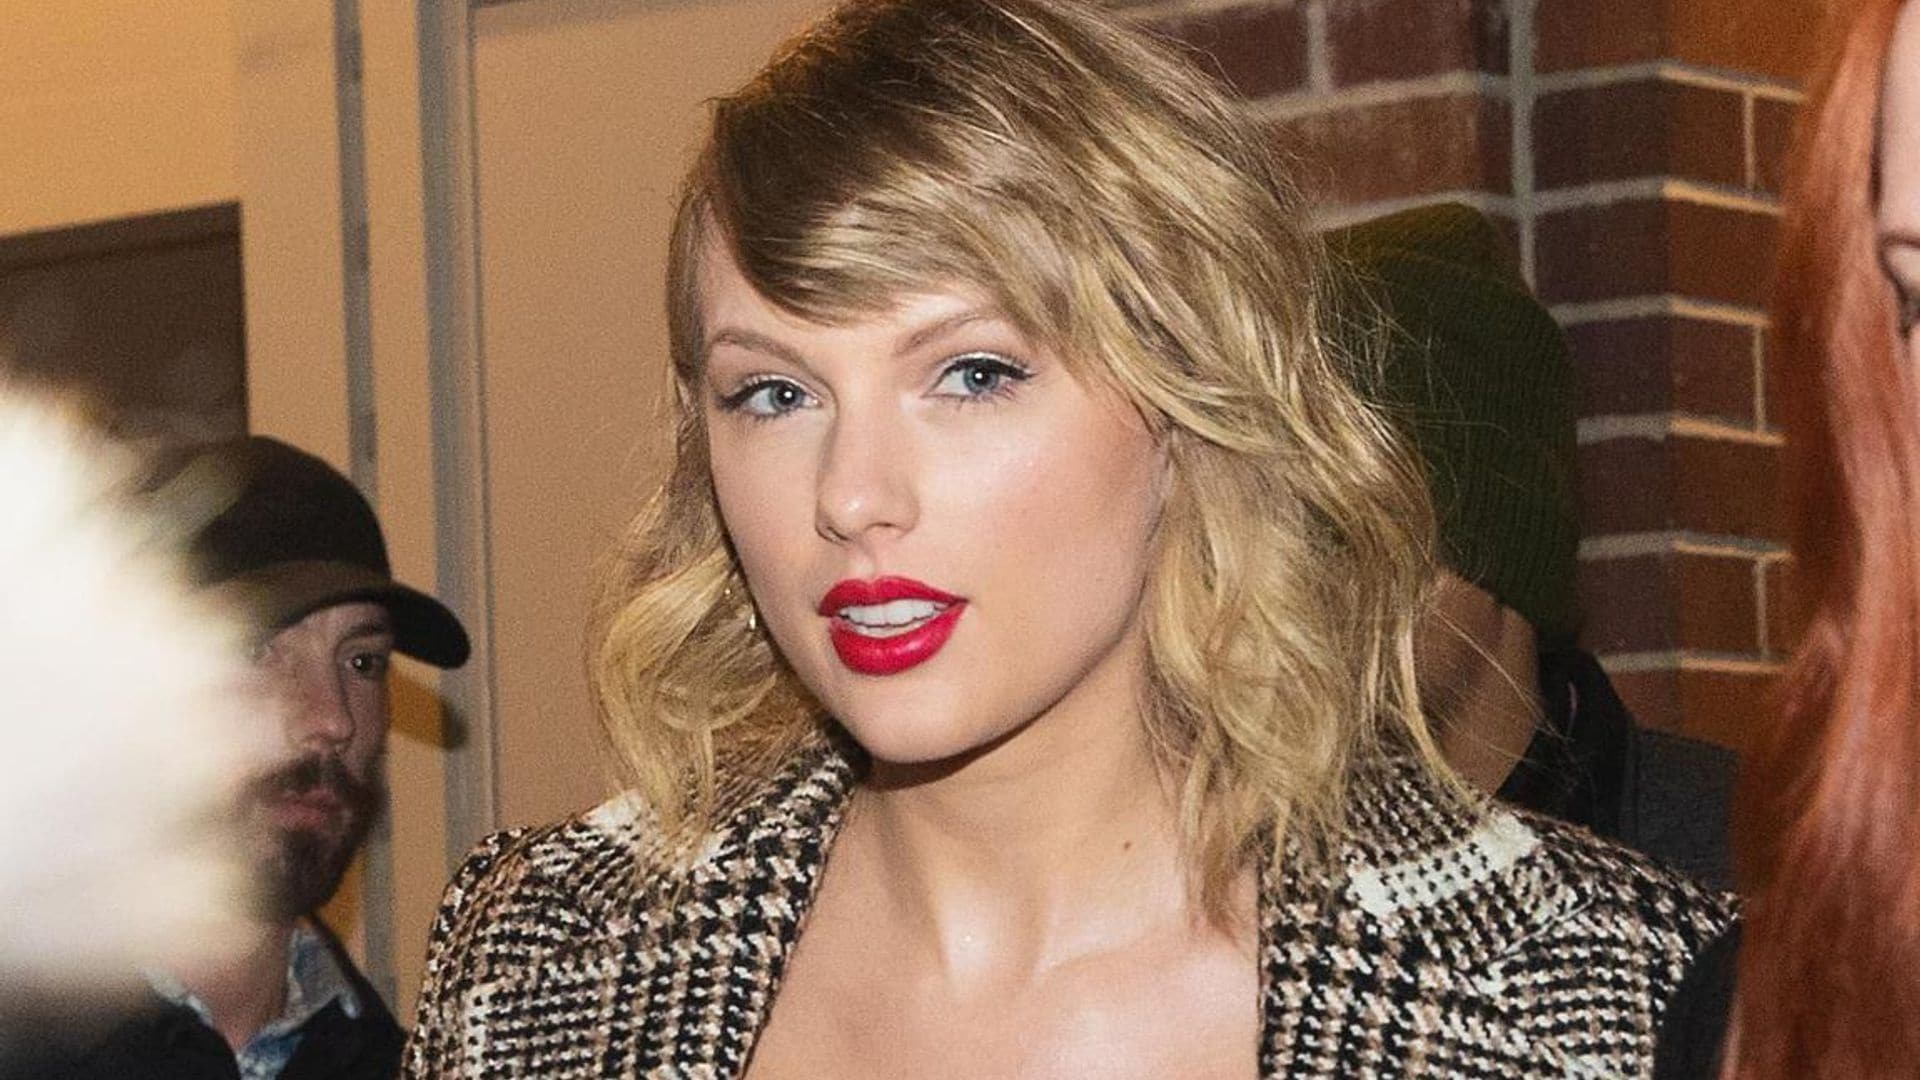 An armed robbery occurred next to Taylor Swift’s TriBeCa apartment